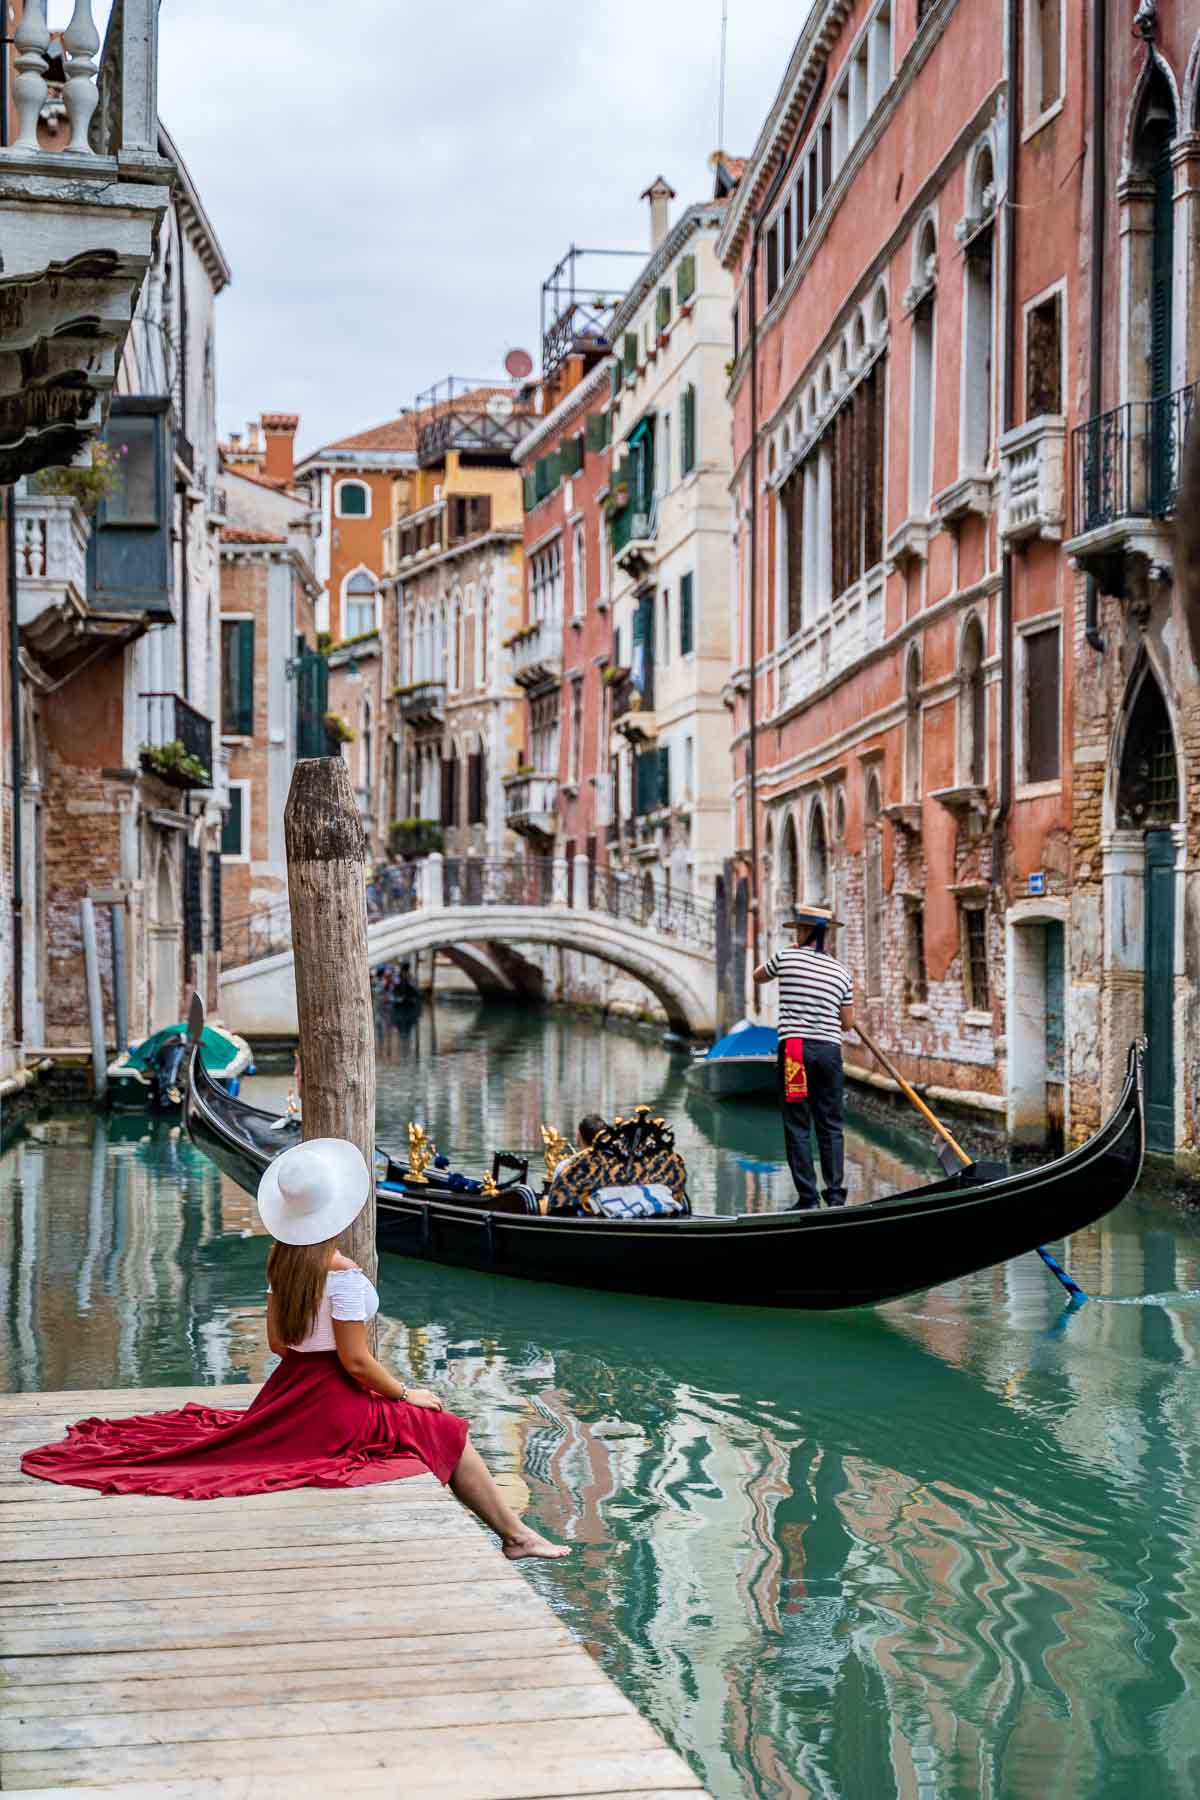 Girl in a red skirt sitting on a little pier along the canals, which is one of the best Venice Instagram spots